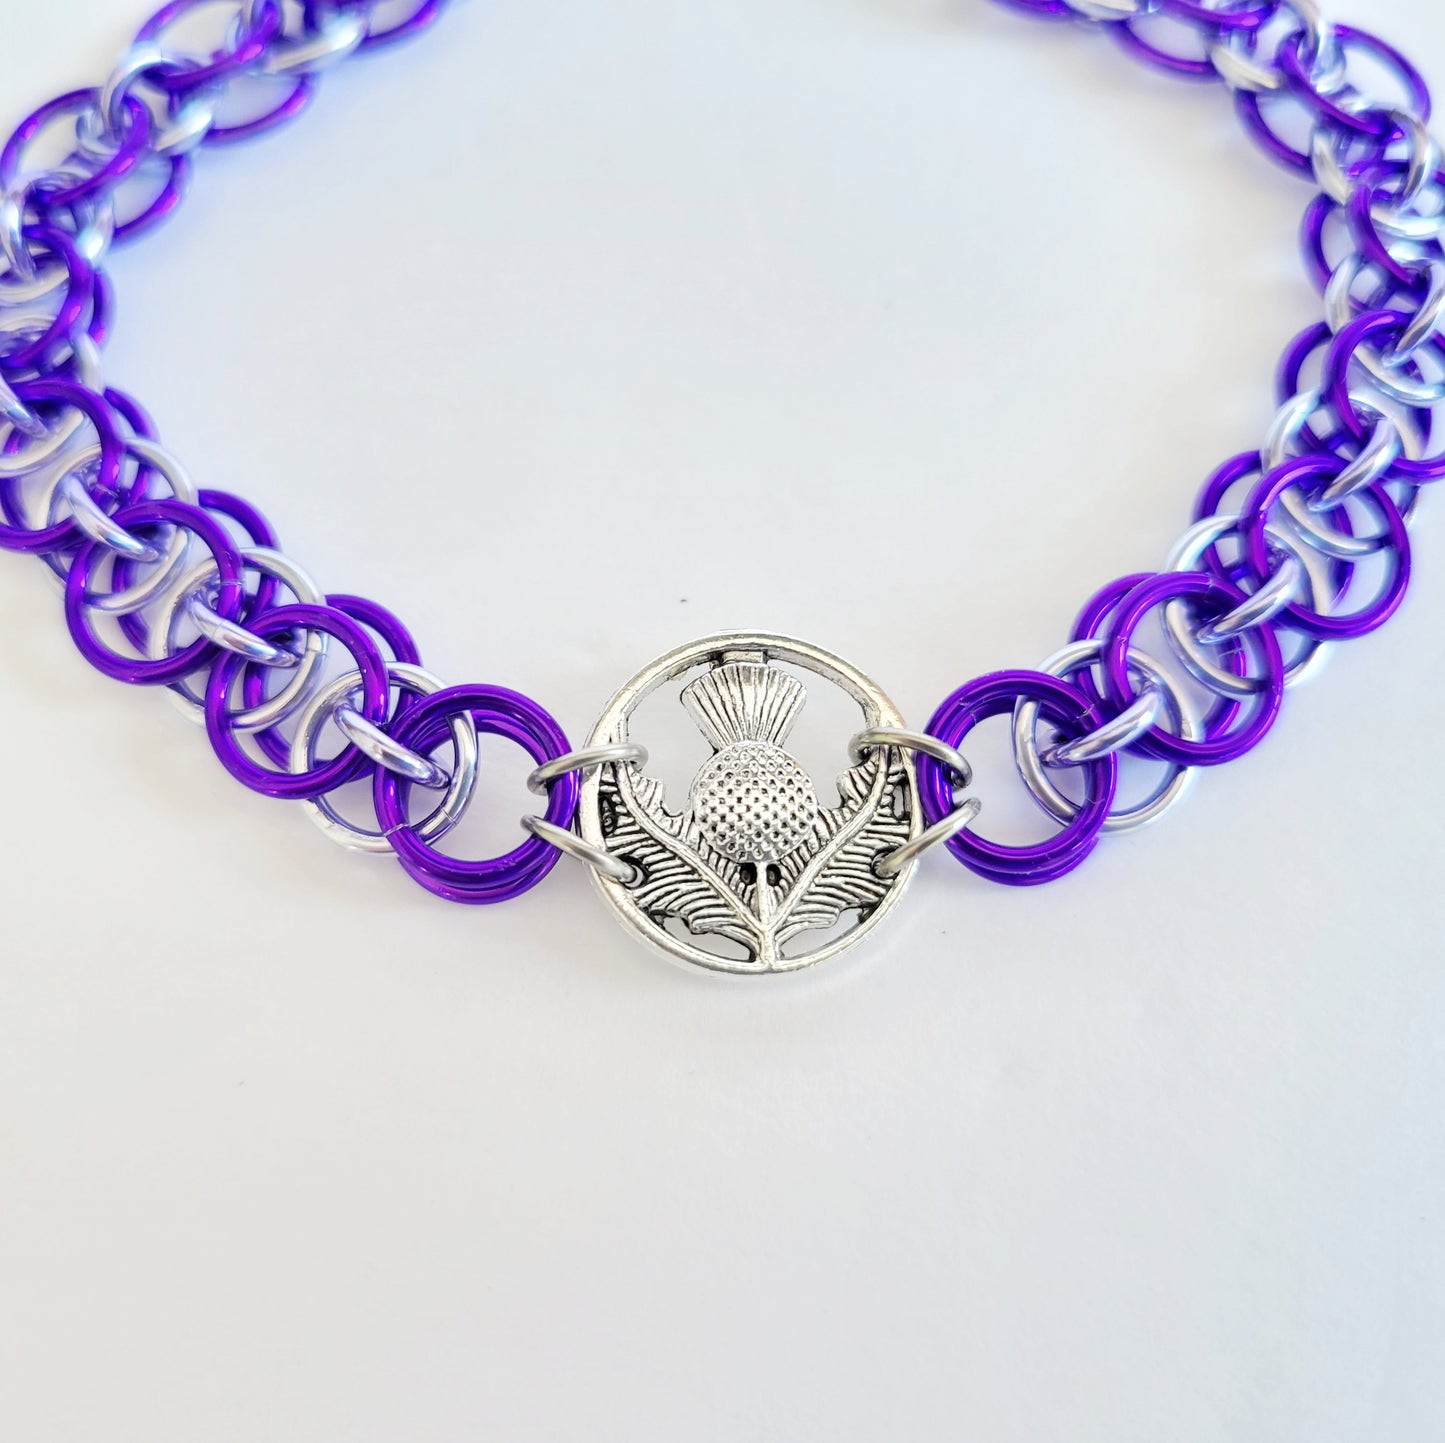 Thistle Chainmail Bracelet